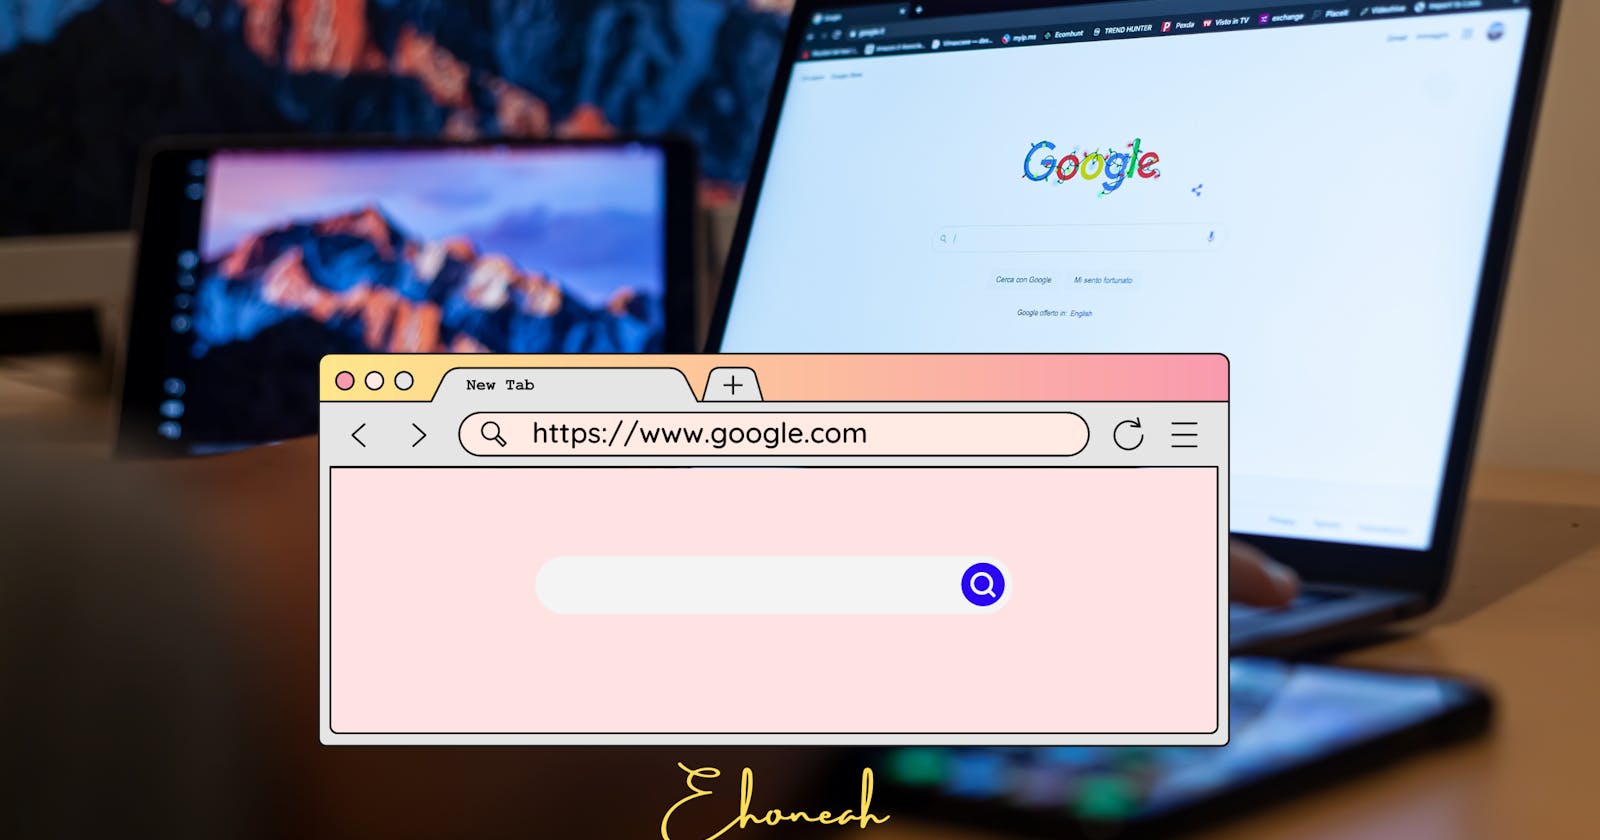 What happens when you type 'www.google.com' in your browser and press Enter